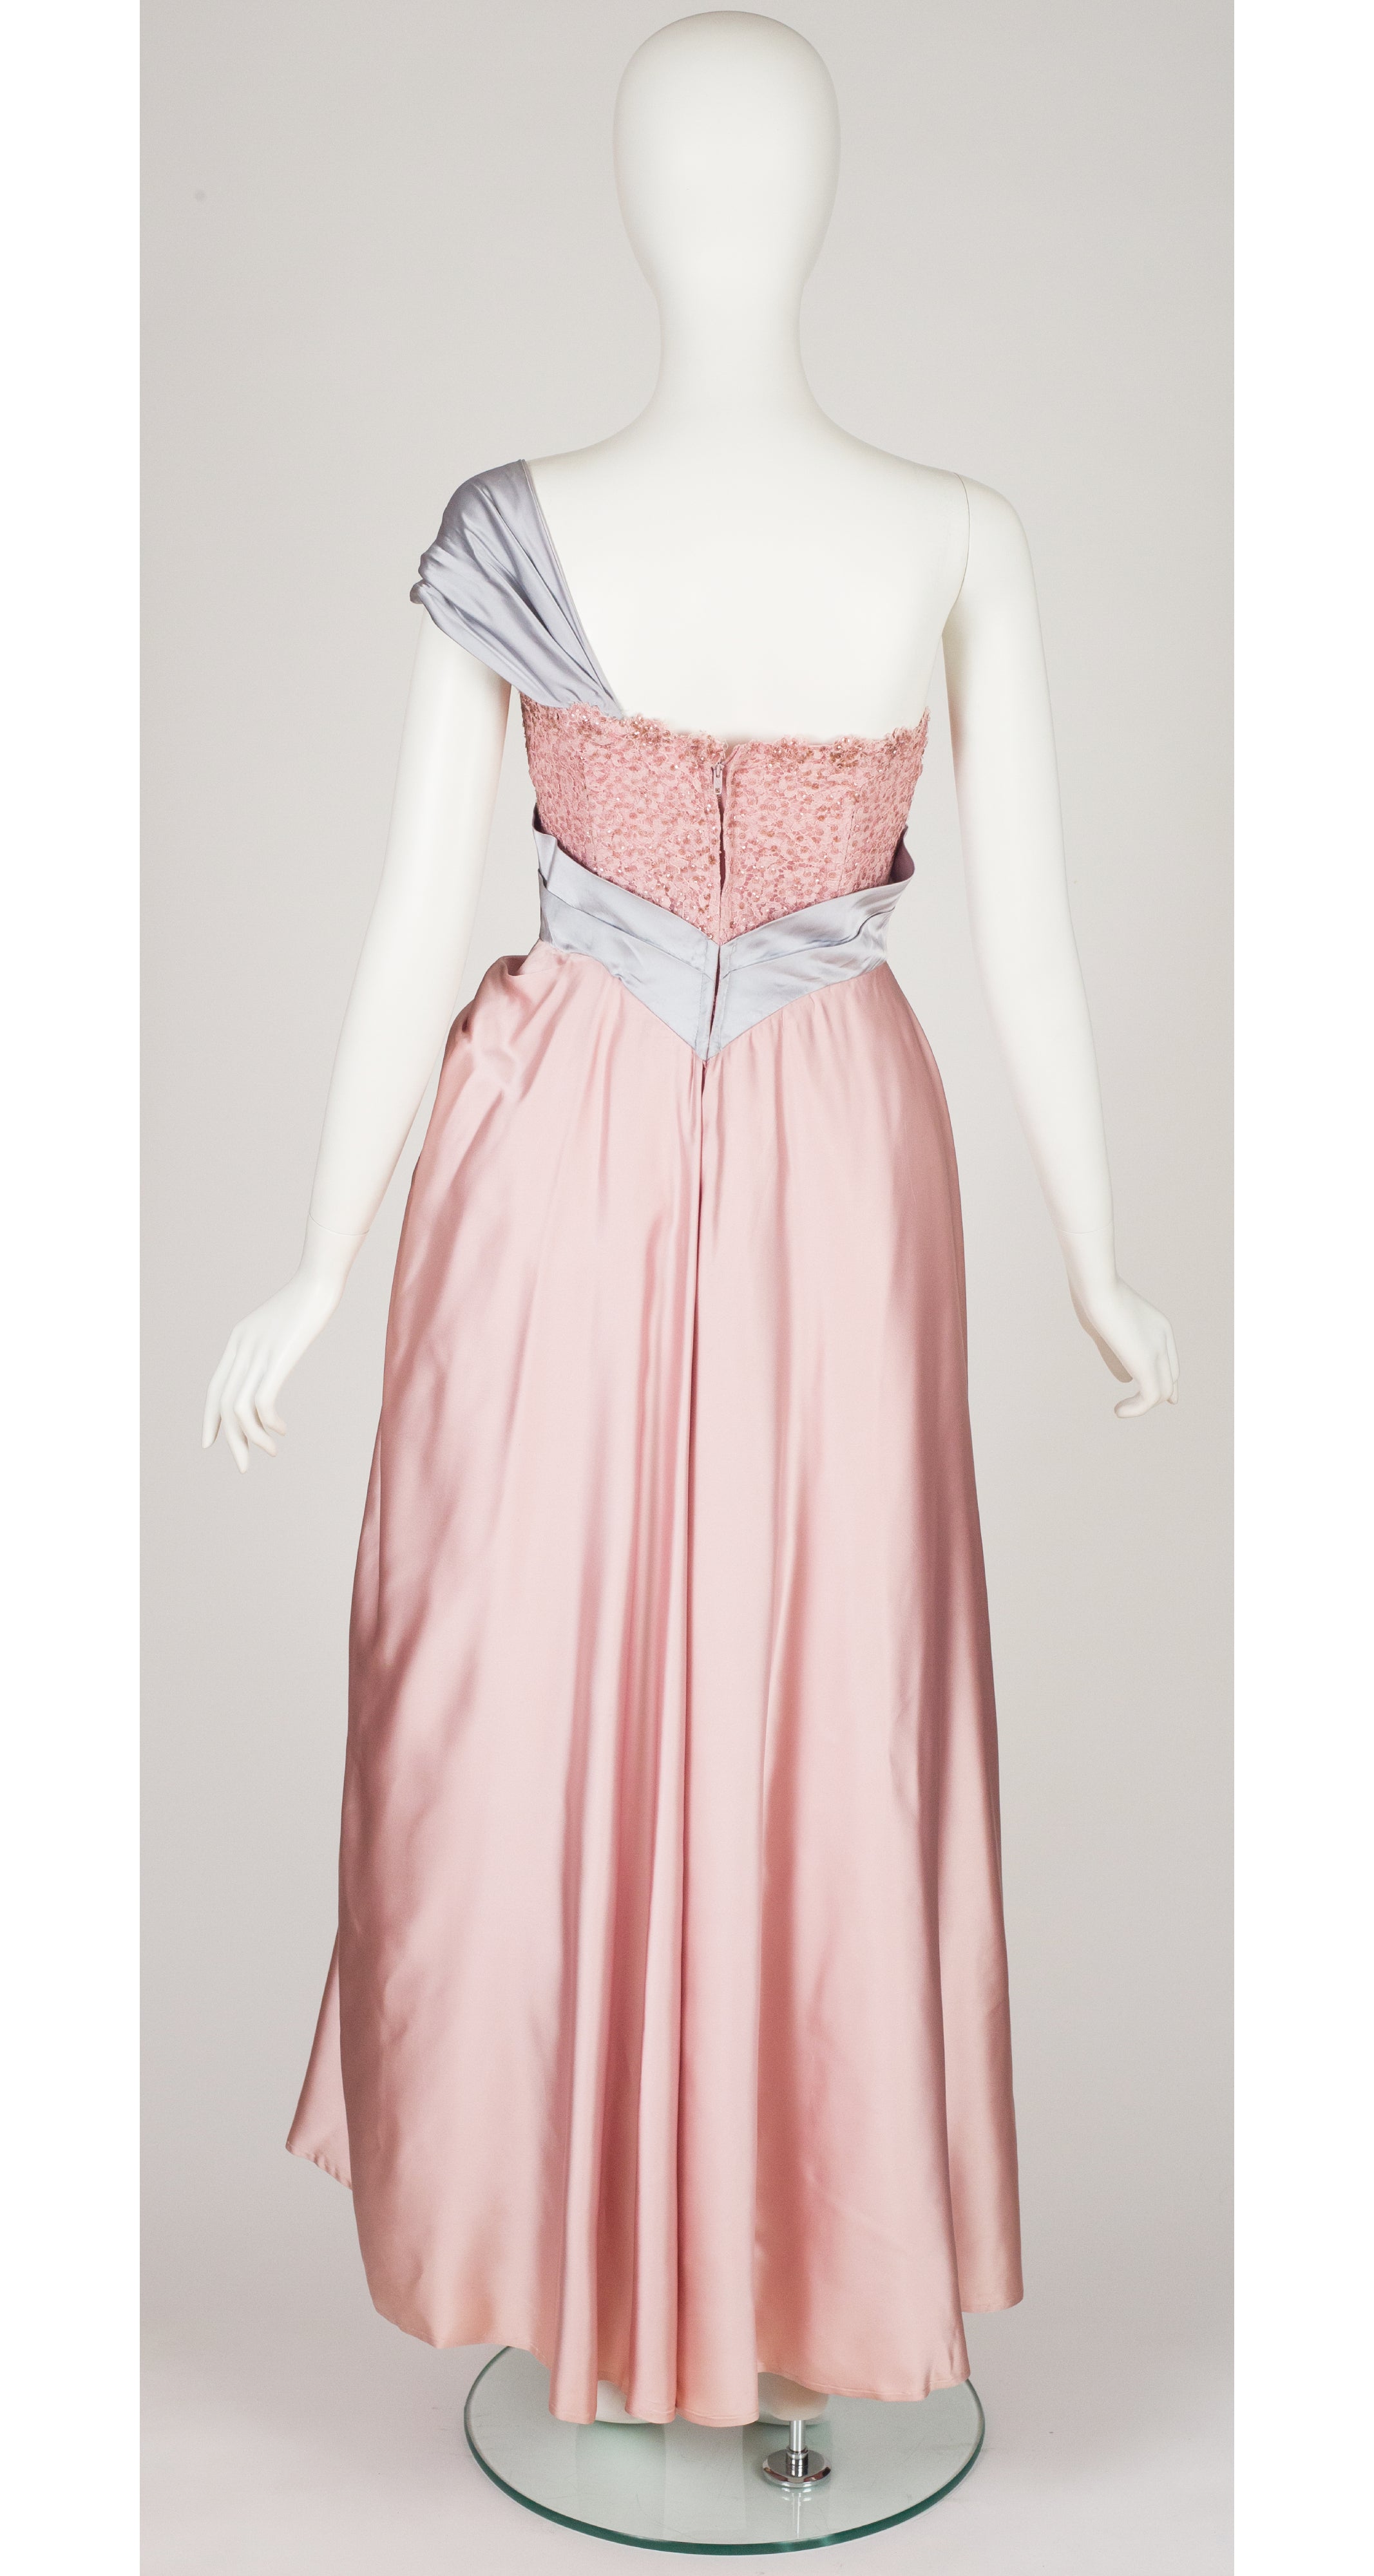 1950s Pink & Blue Satin Gown with Shawl